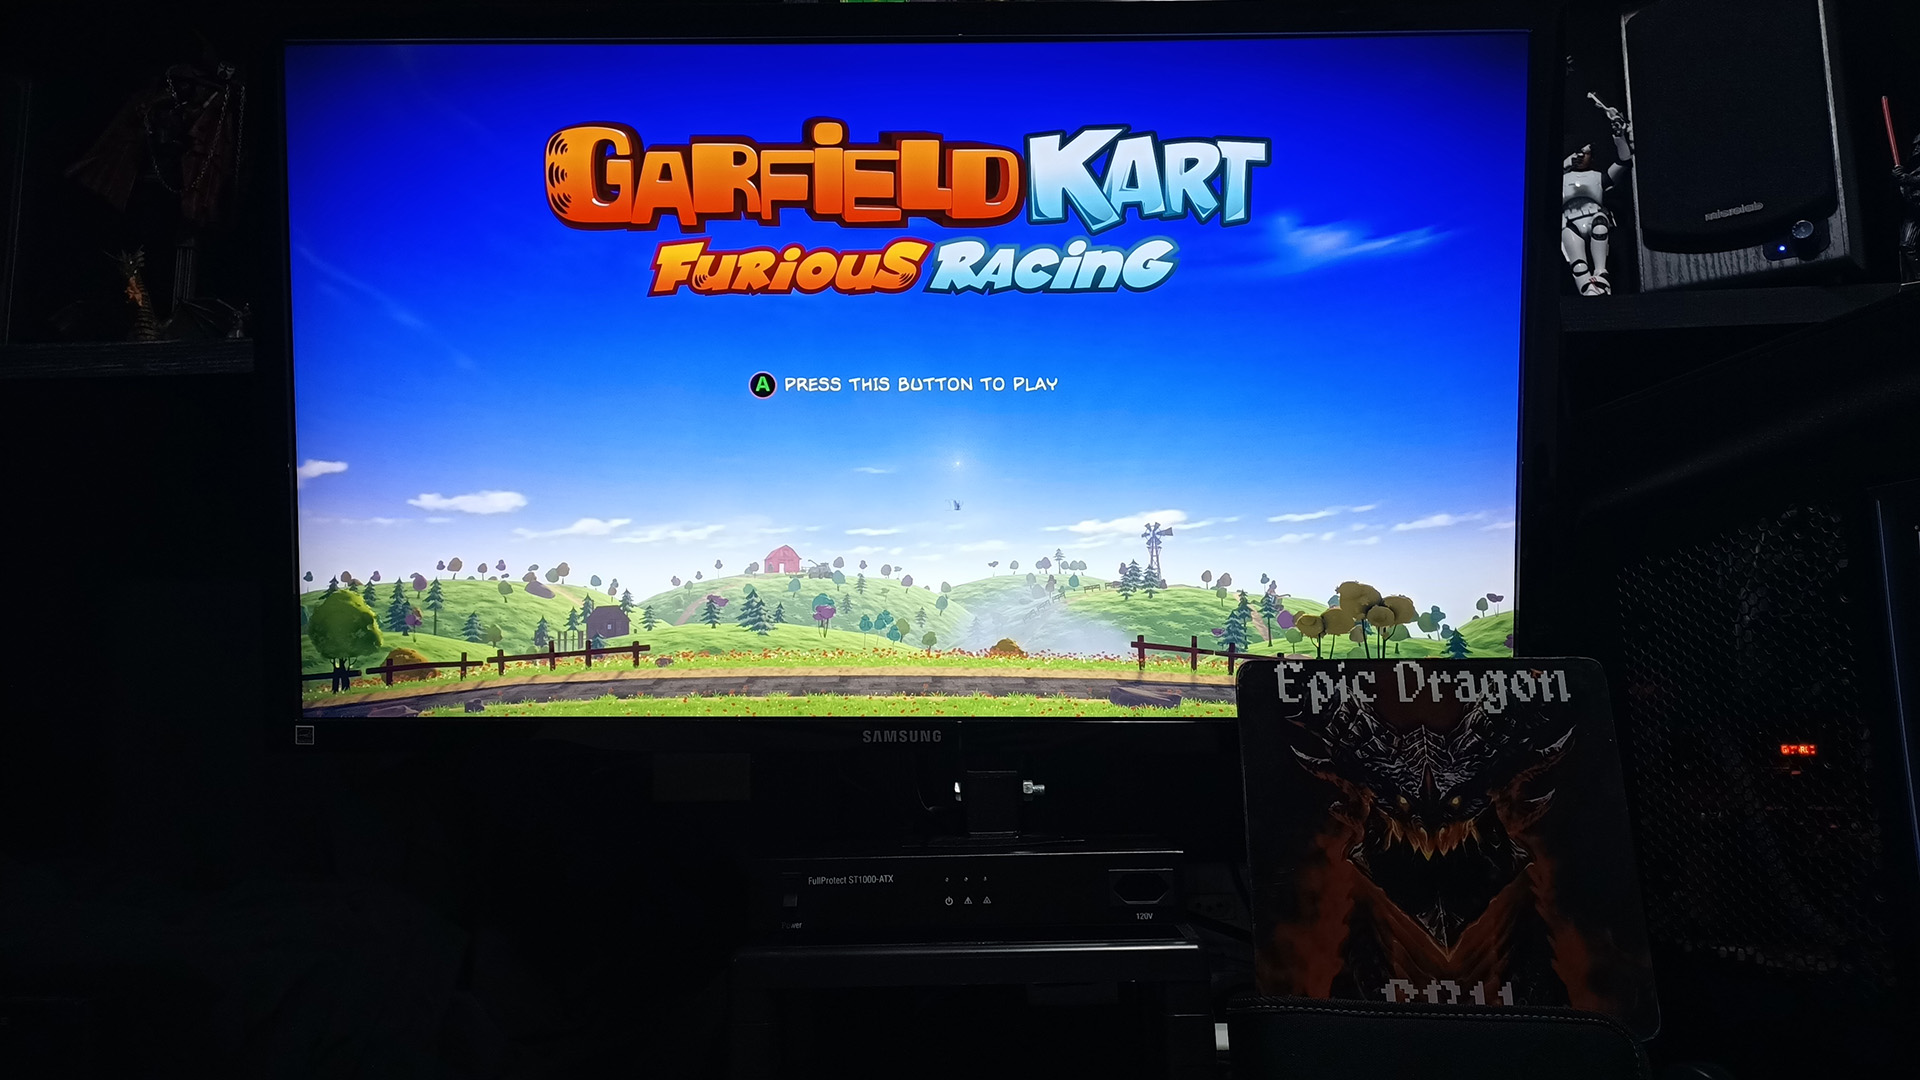 EpicDragon: Garfield Kart Furious Racing: Crazy Dunes [Time Trial: Lap Time] (PC) 0:00:28.284 points on 2022-08-08 21:25:47